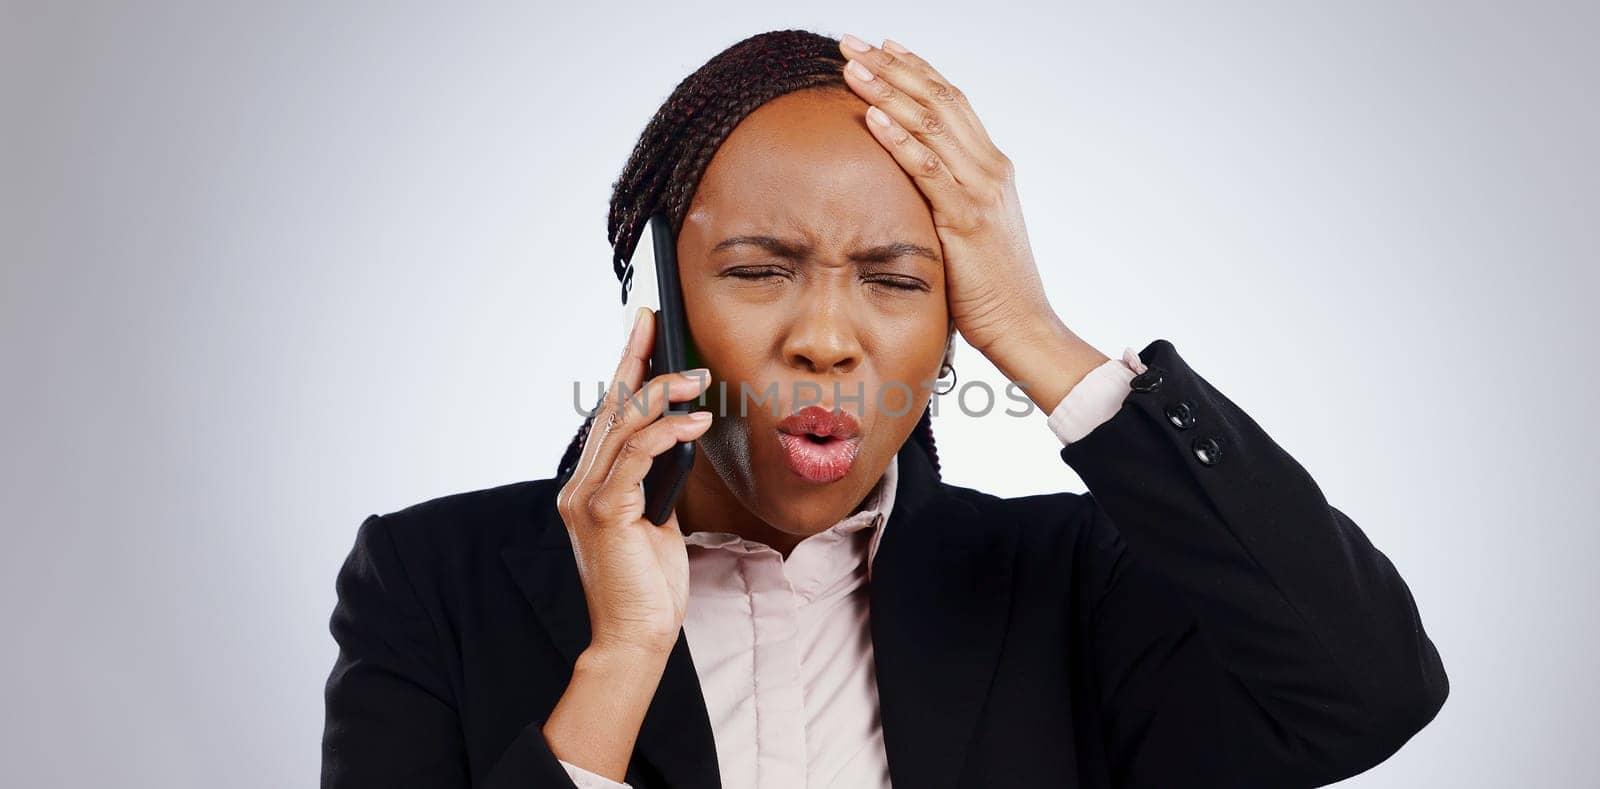 Phone, business woman and angry from scam conversation and anxiety from problem and fail. Studio, white background and frustrated female person with spam communication and identity theft mistake.